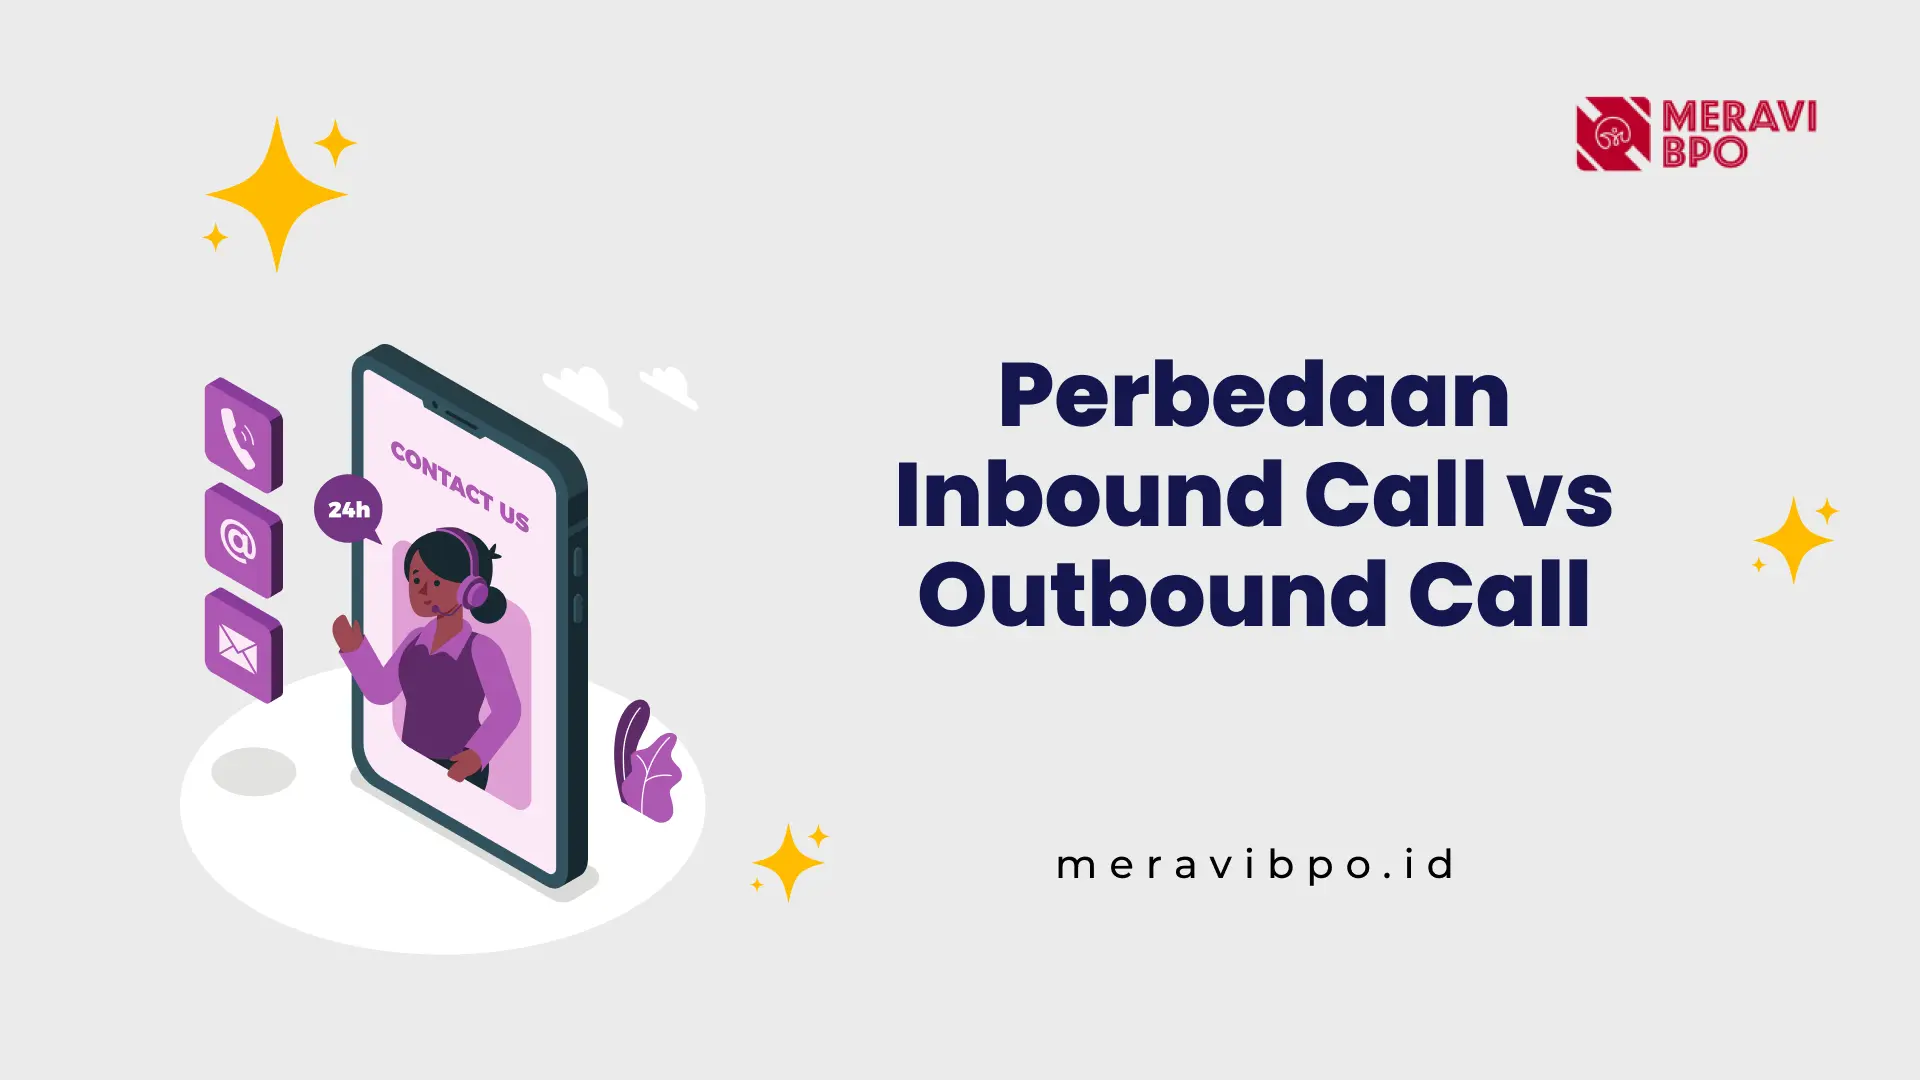 Perbedaan Inbound Call vs Outbound Call